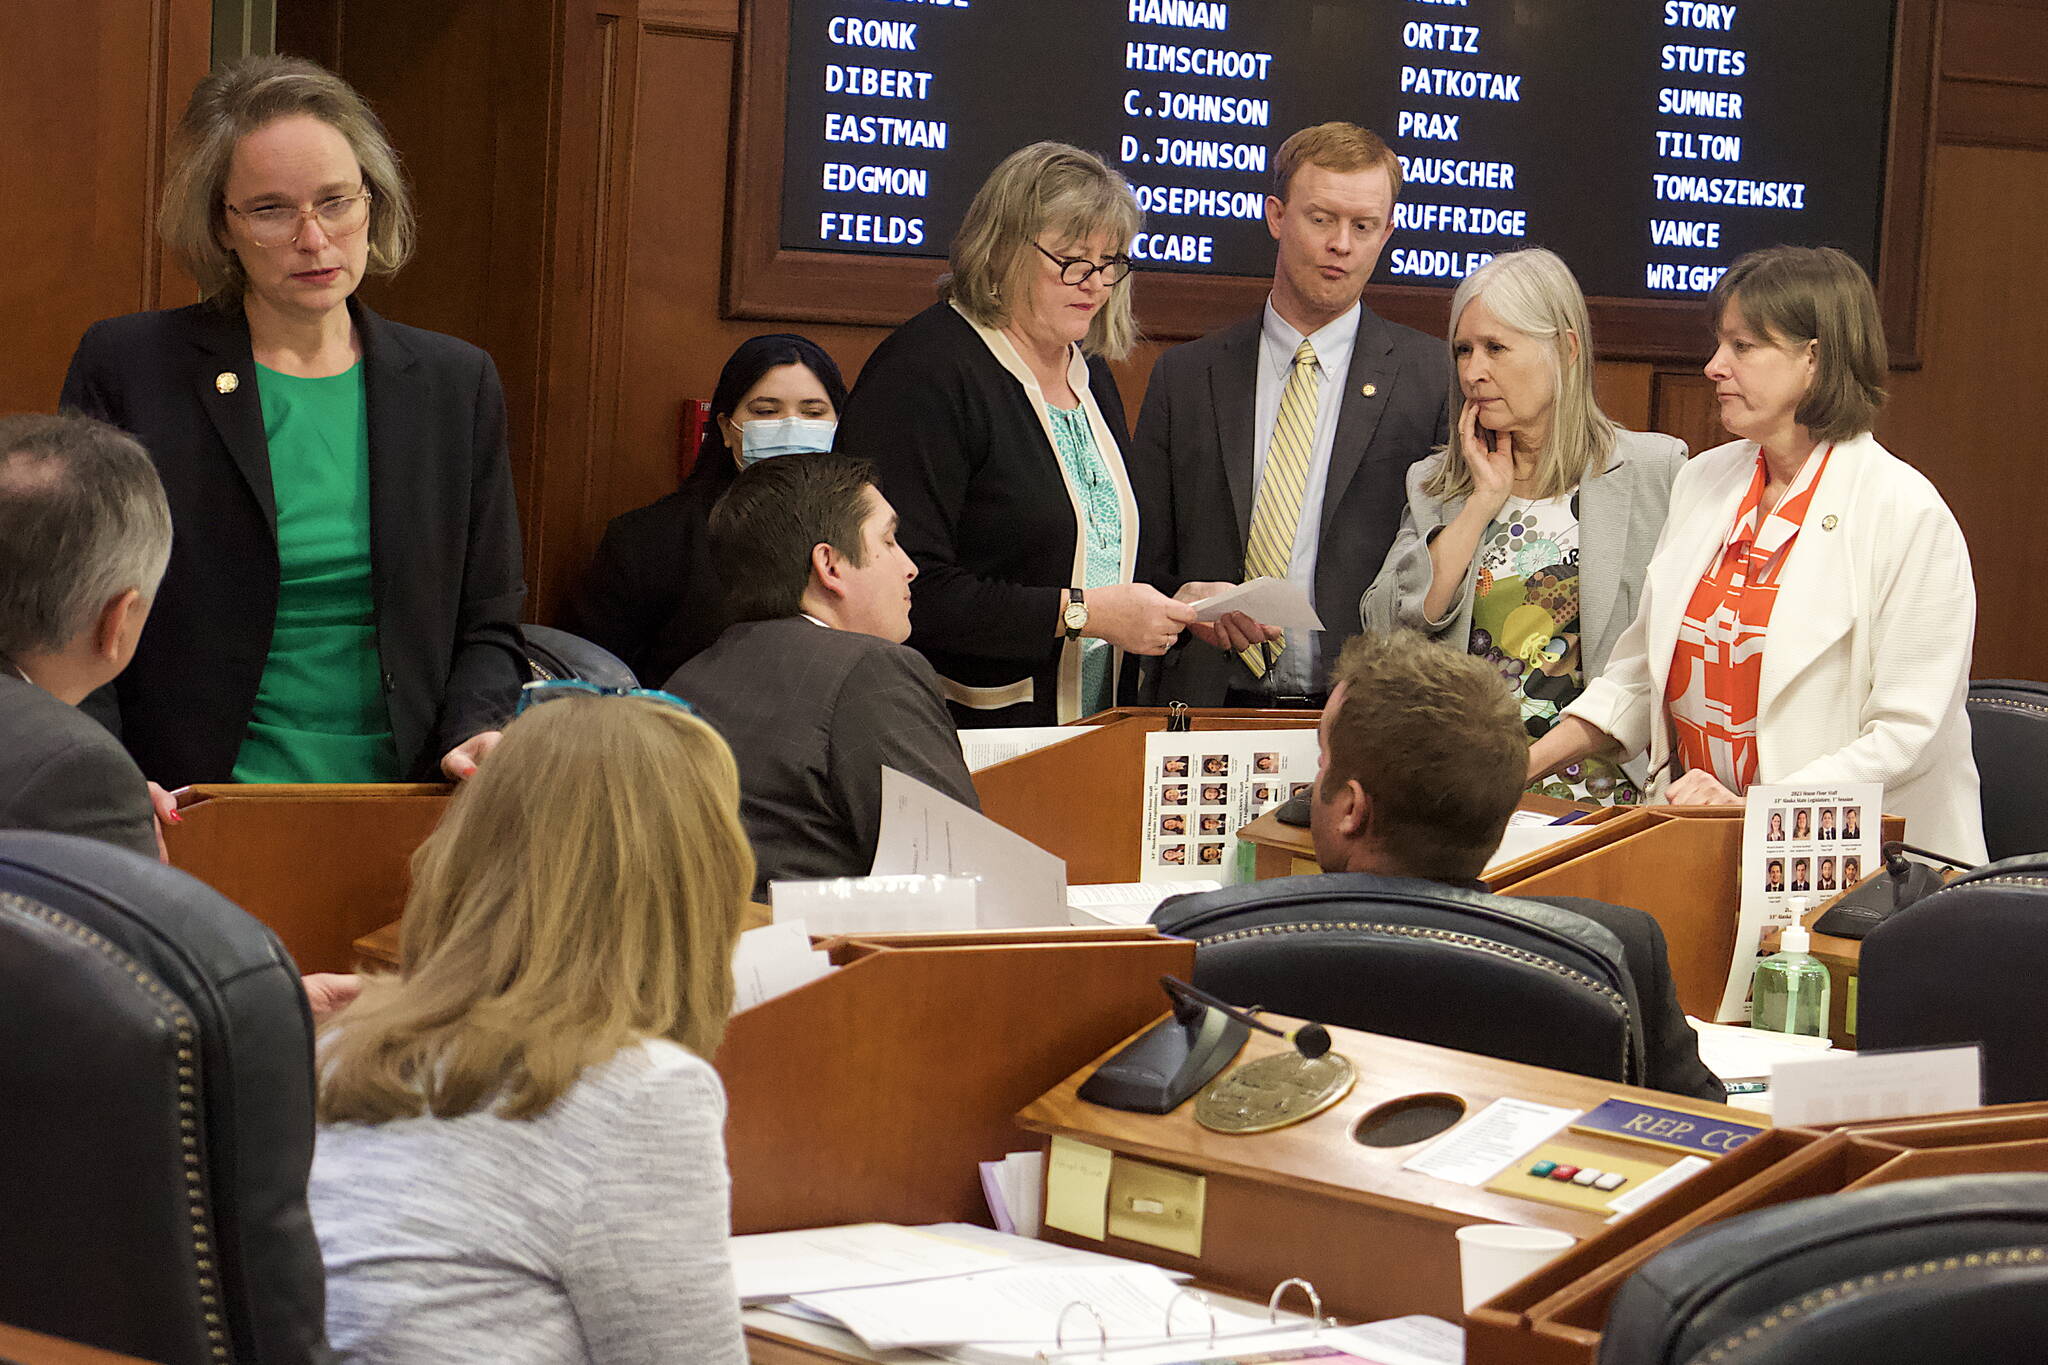 State House members with wide-ranging views on a so-called “fentanyl bill,” including both of Juneau’s representatives, discuss proposed amendments during Wednesday’s floor session. Standing from left to right are Sarah Vance, R-Homer, Sara Hannan, D-Juneau, David Eastman, R-Wasilla, Andi Story, D-Juneau, and Alyse Galvin, D-Anchorage. The bill passed by a 35-5 vote Thursday, with Story voting in favor and Hannan against.